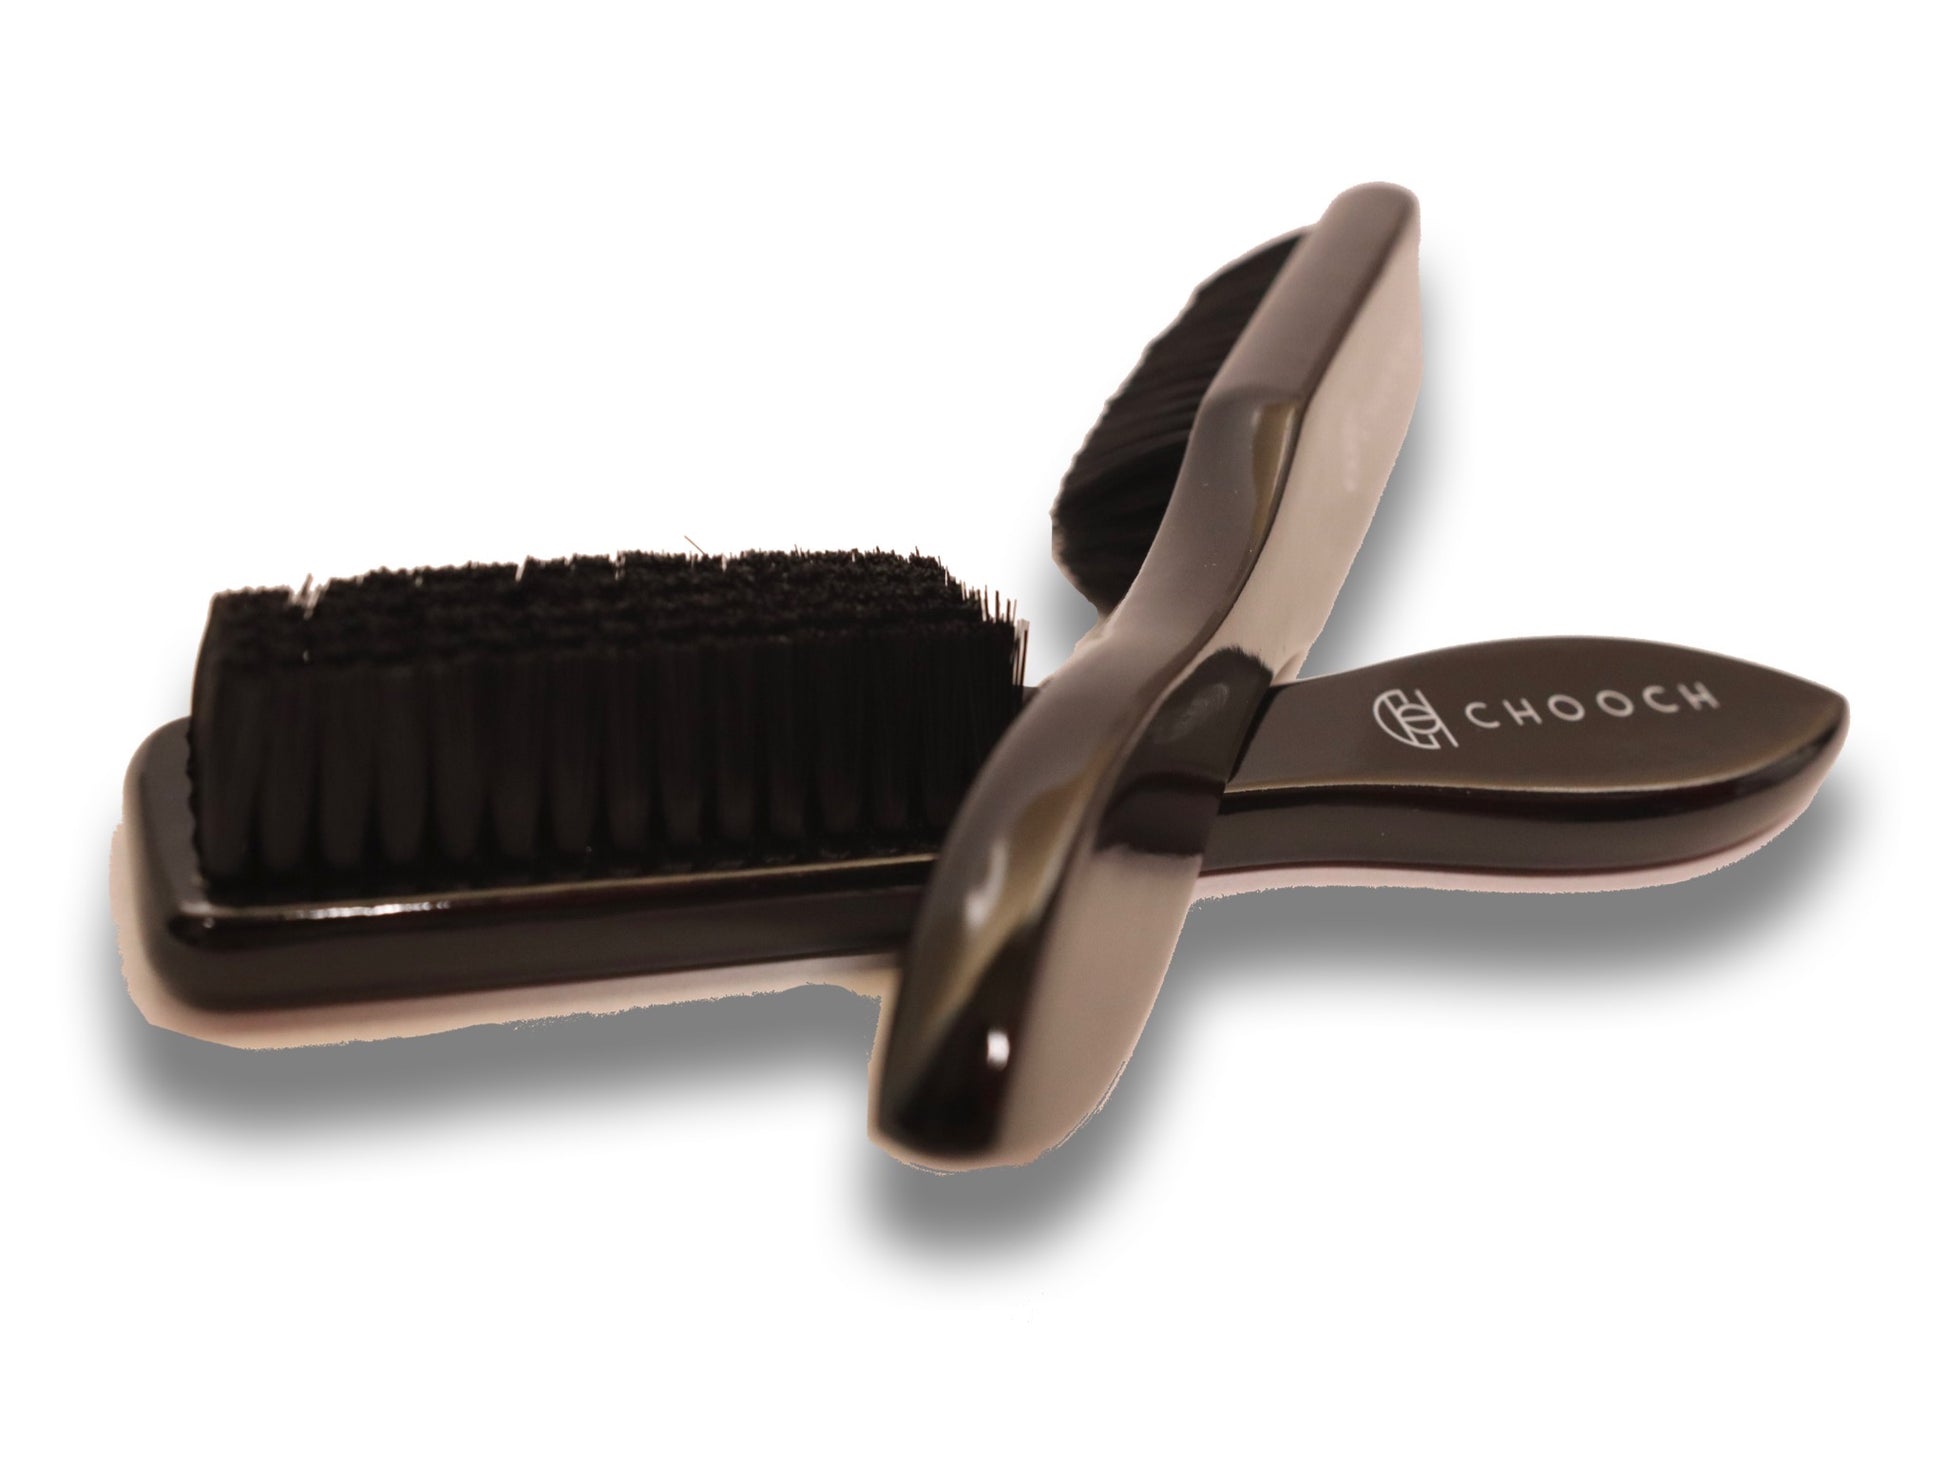 Professional Fade and Cleaning Barber Hair Brush with 100% Natural